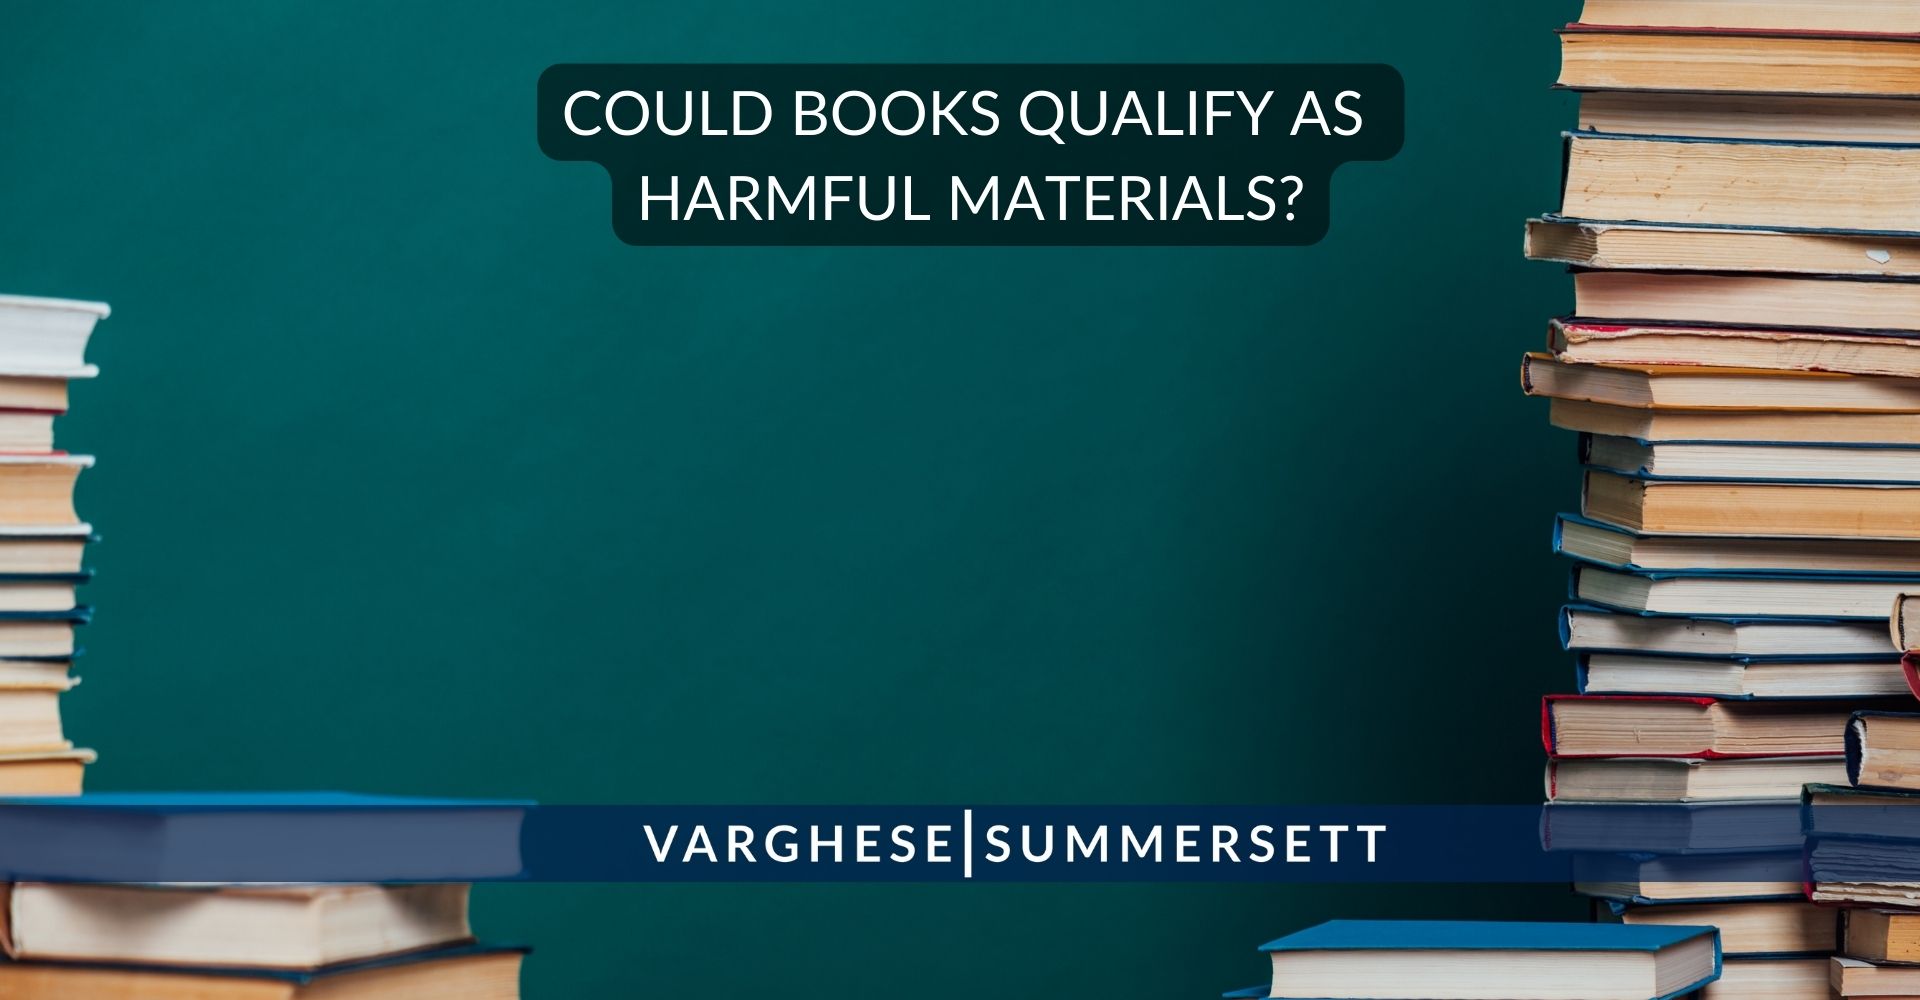 can books qualify as harmful materials